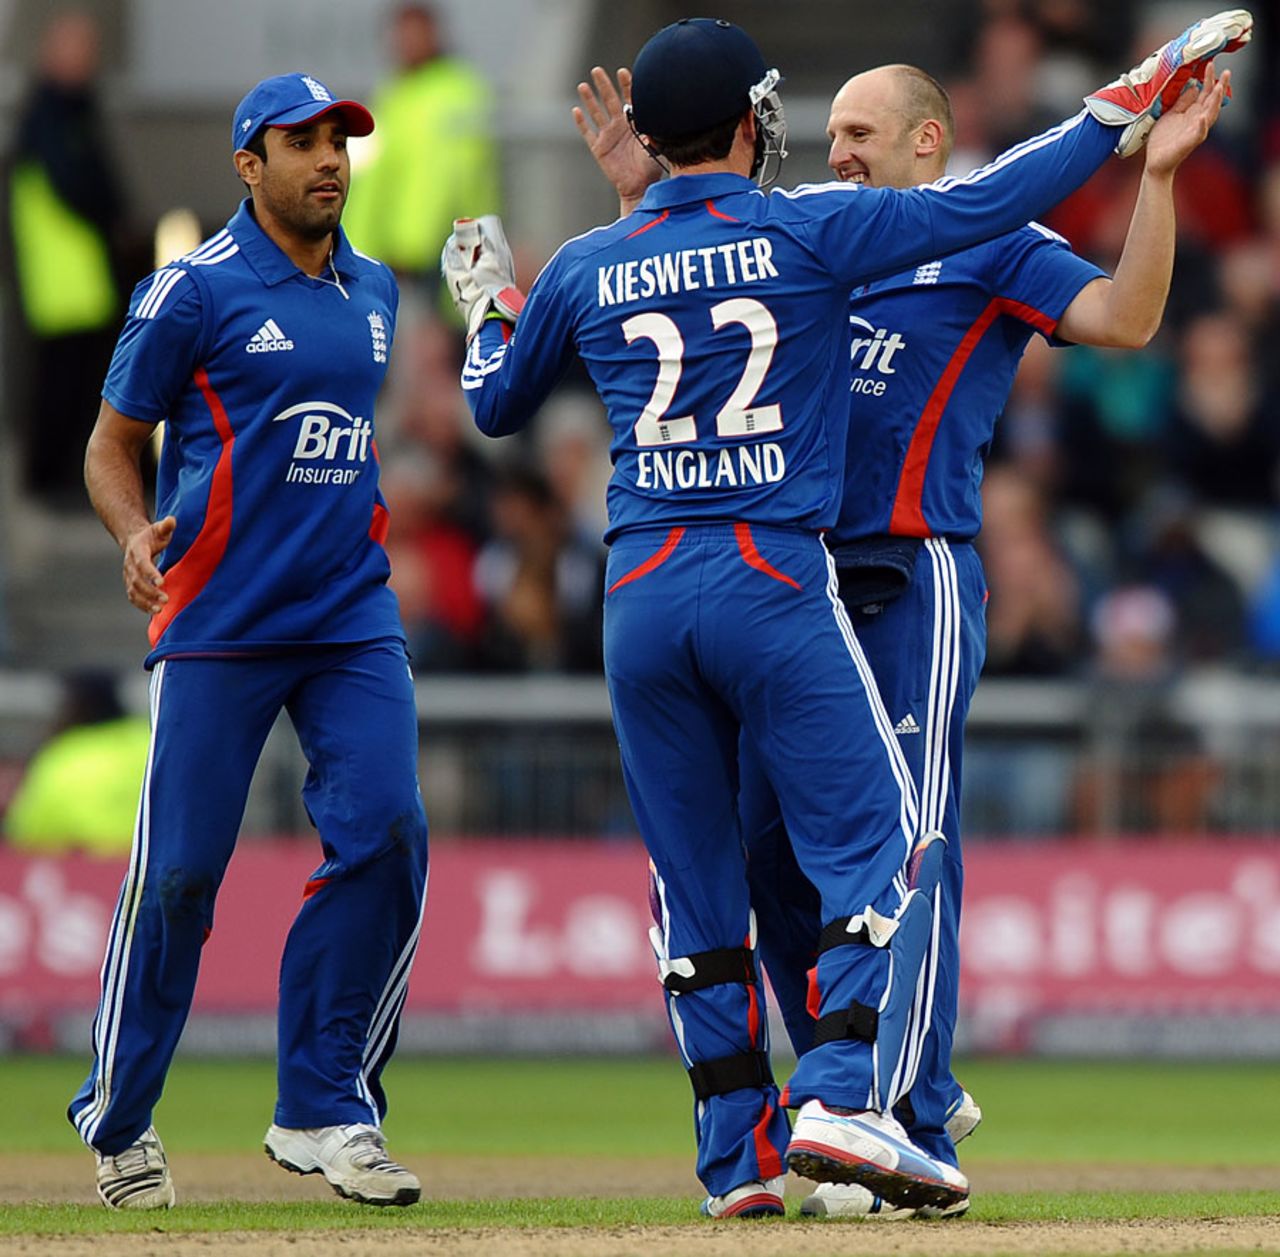 James Tredwell struck in his first over, England v Australia, 5th ODI, Old Trafford, July 10, 2012